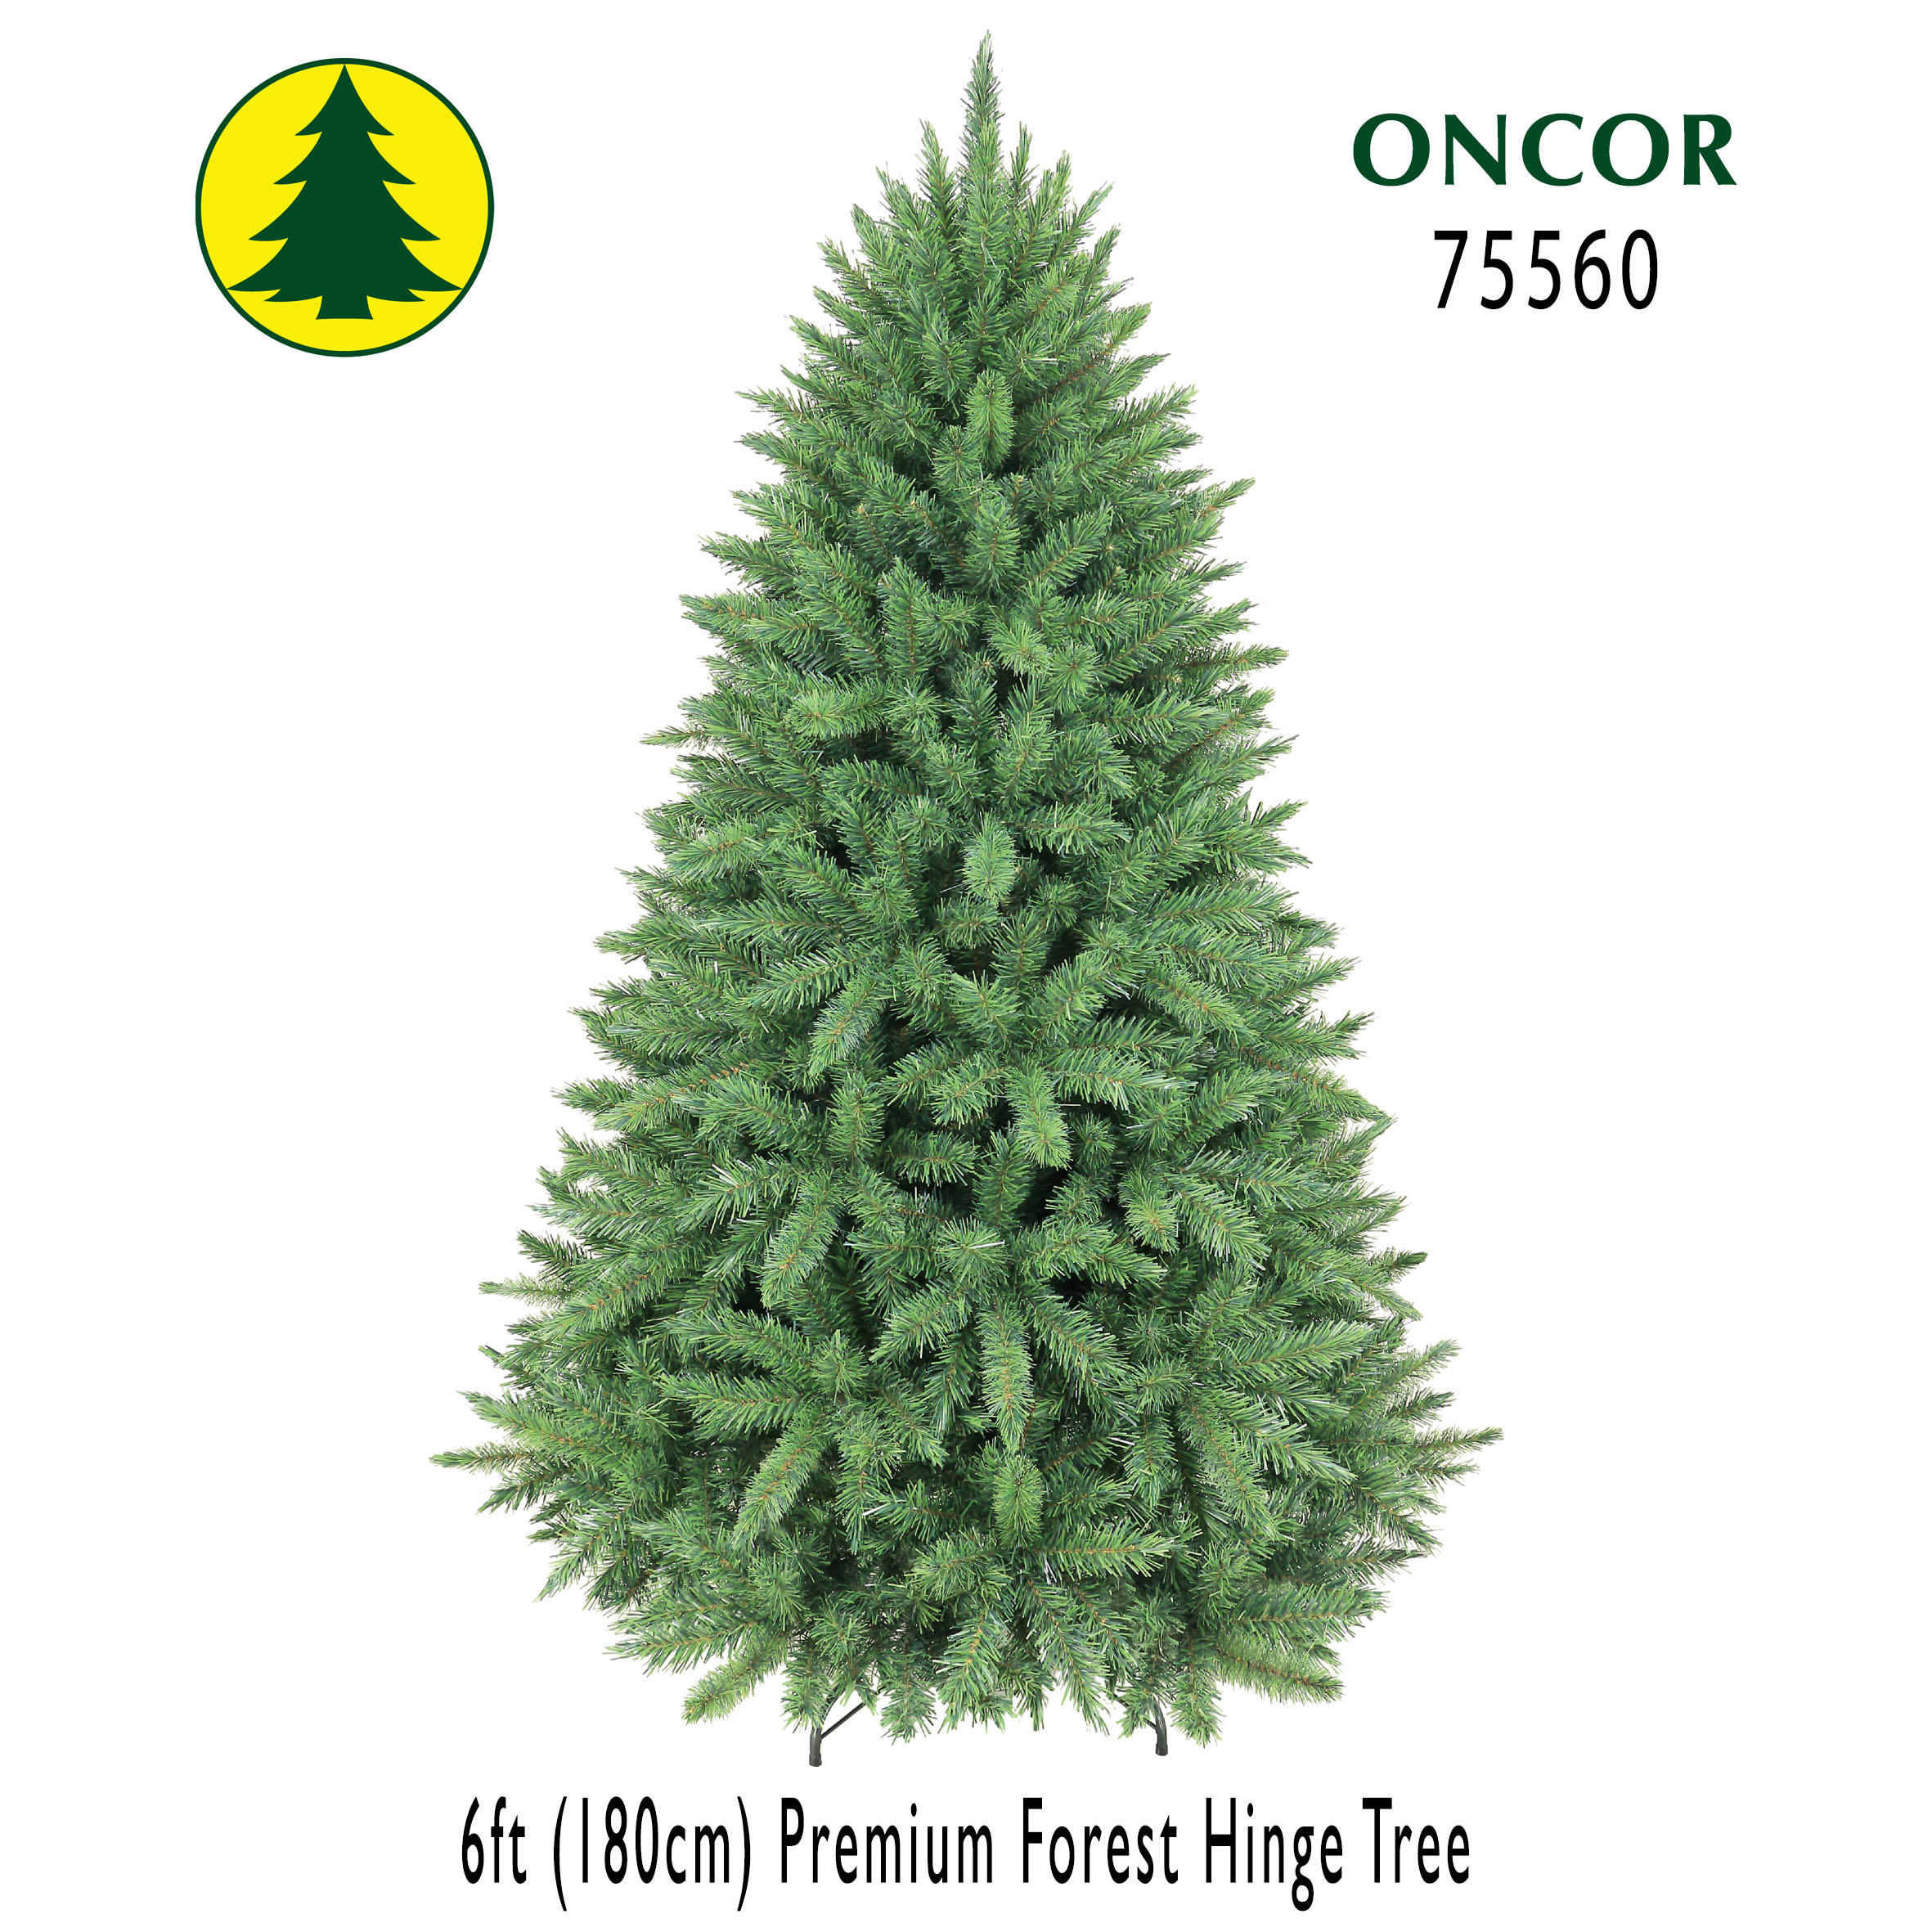 Oncor Recycled Christmas Trees